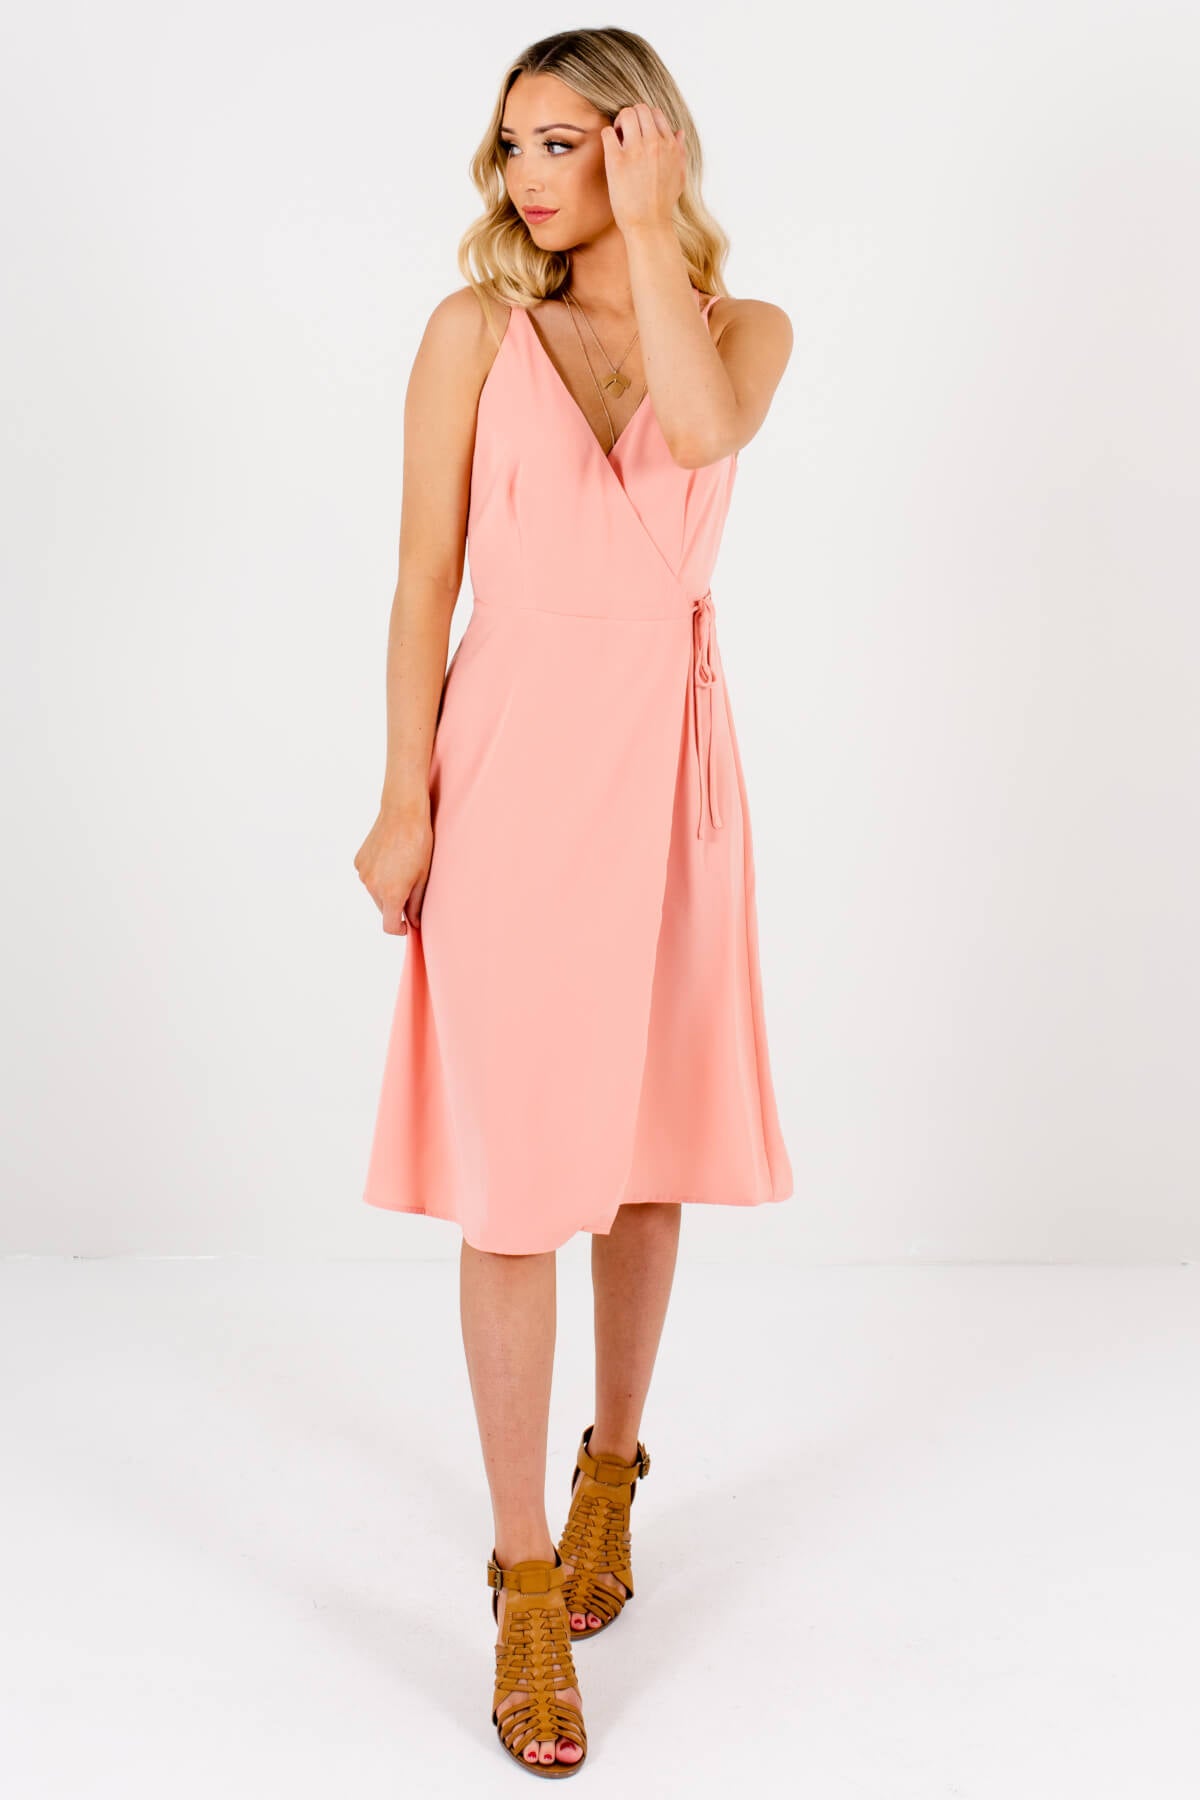 Light Pink Cute and Comfortable Boutique Knee-Length Wrap Dresses for Women